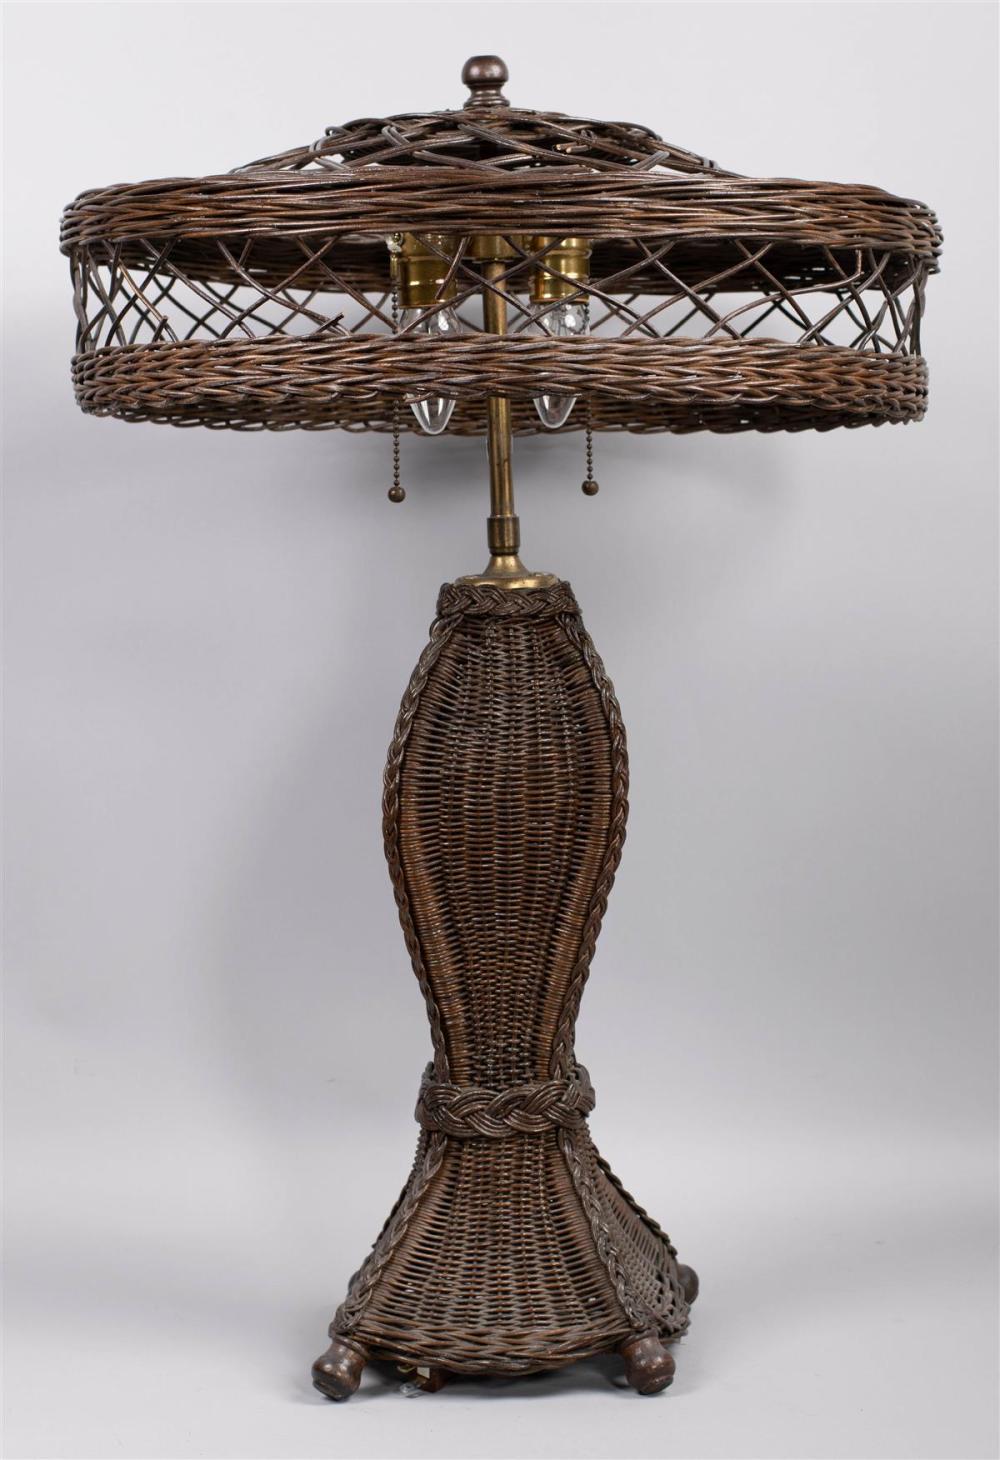 BROWN WICKER TABLE LAMP WITH MATCHING 33b649